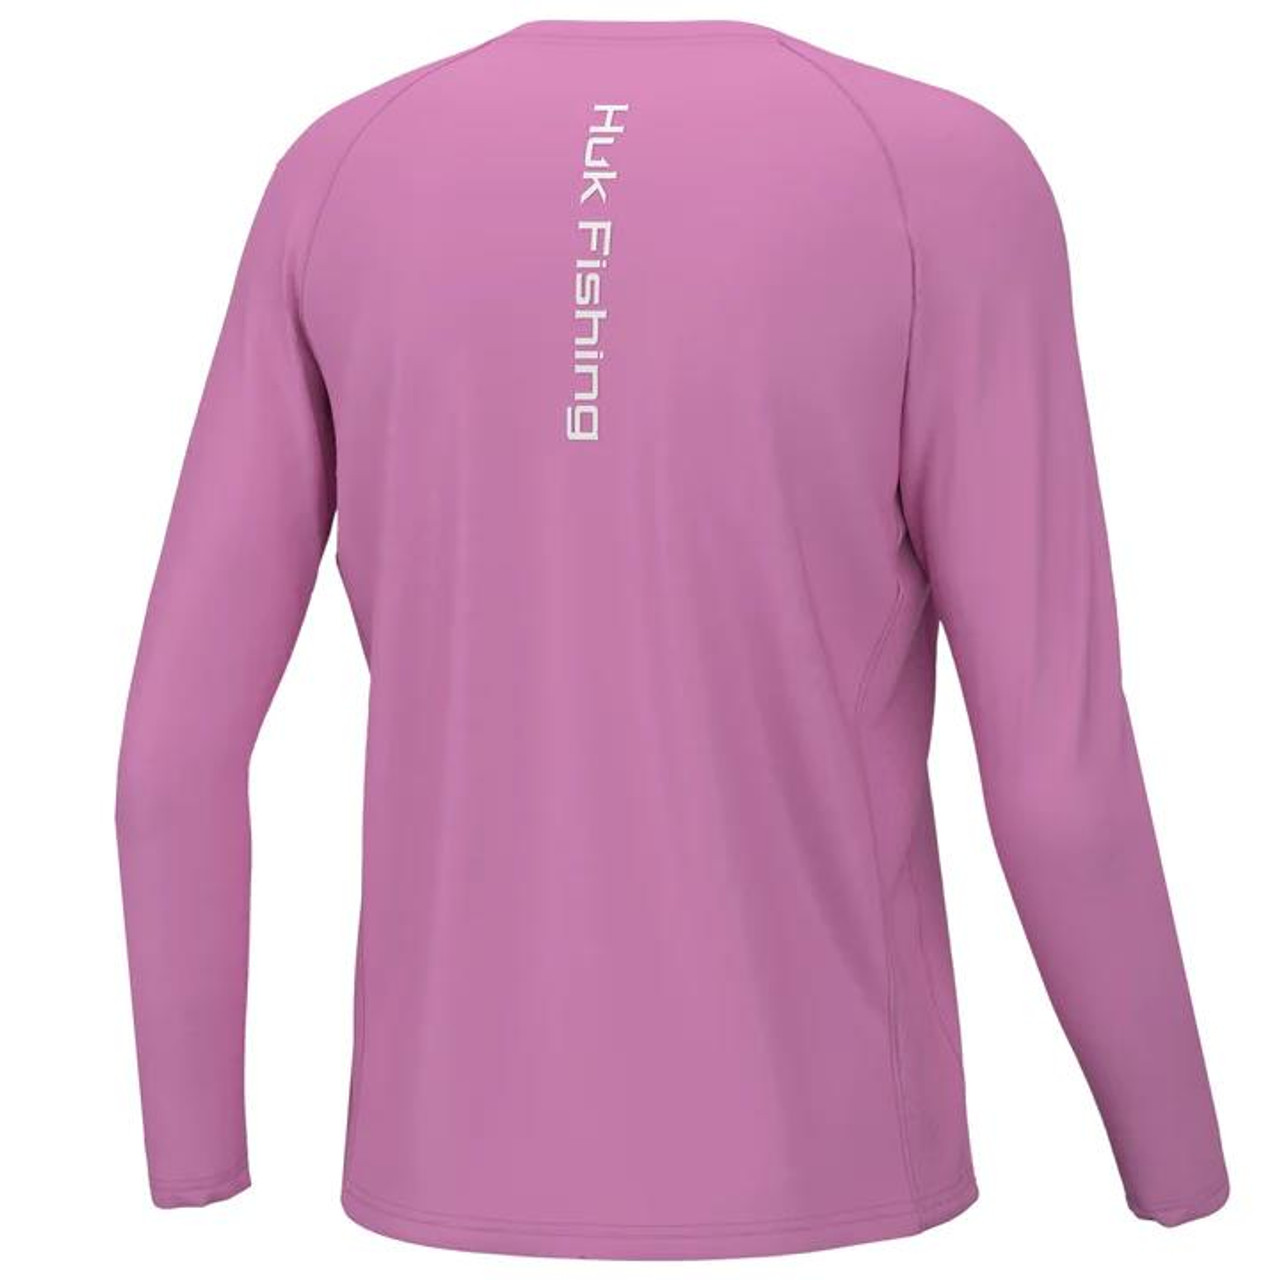 Huk Youth Pursuit Solid Shirt - Long Sleeve - Ultra Pink - Dance's